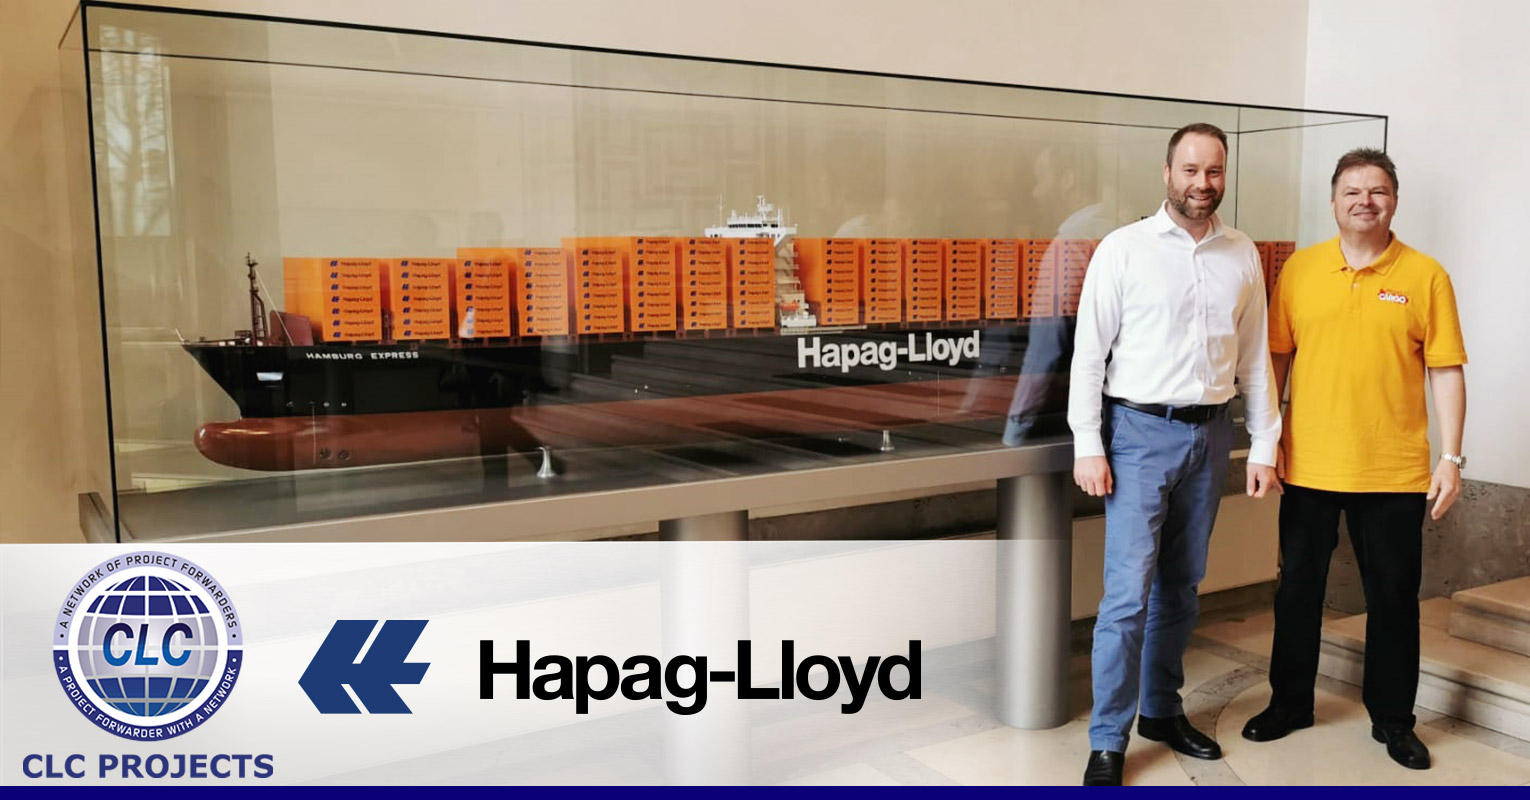 CLC Projects and Hapag-Lloyd at their Head Office in Hamburg